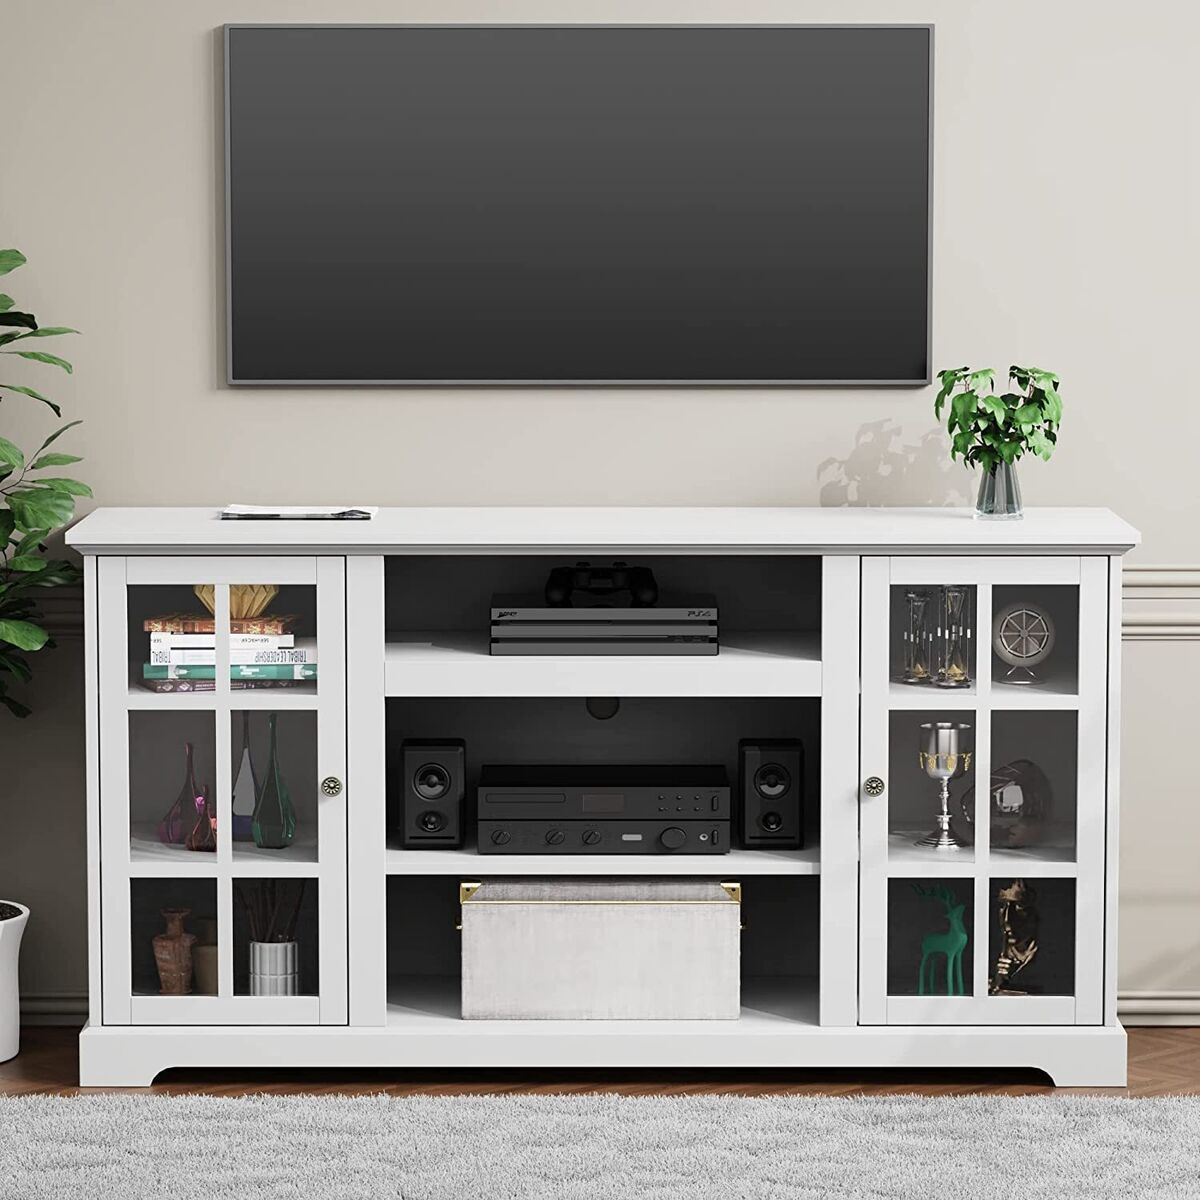 Farmhouse Tv Stand For Tv's Up To 65" Entertainment Center W/ Storage  Shelves | Ebay Pertaining To Farmhouse Stands For Tvs (View 13 of 15)